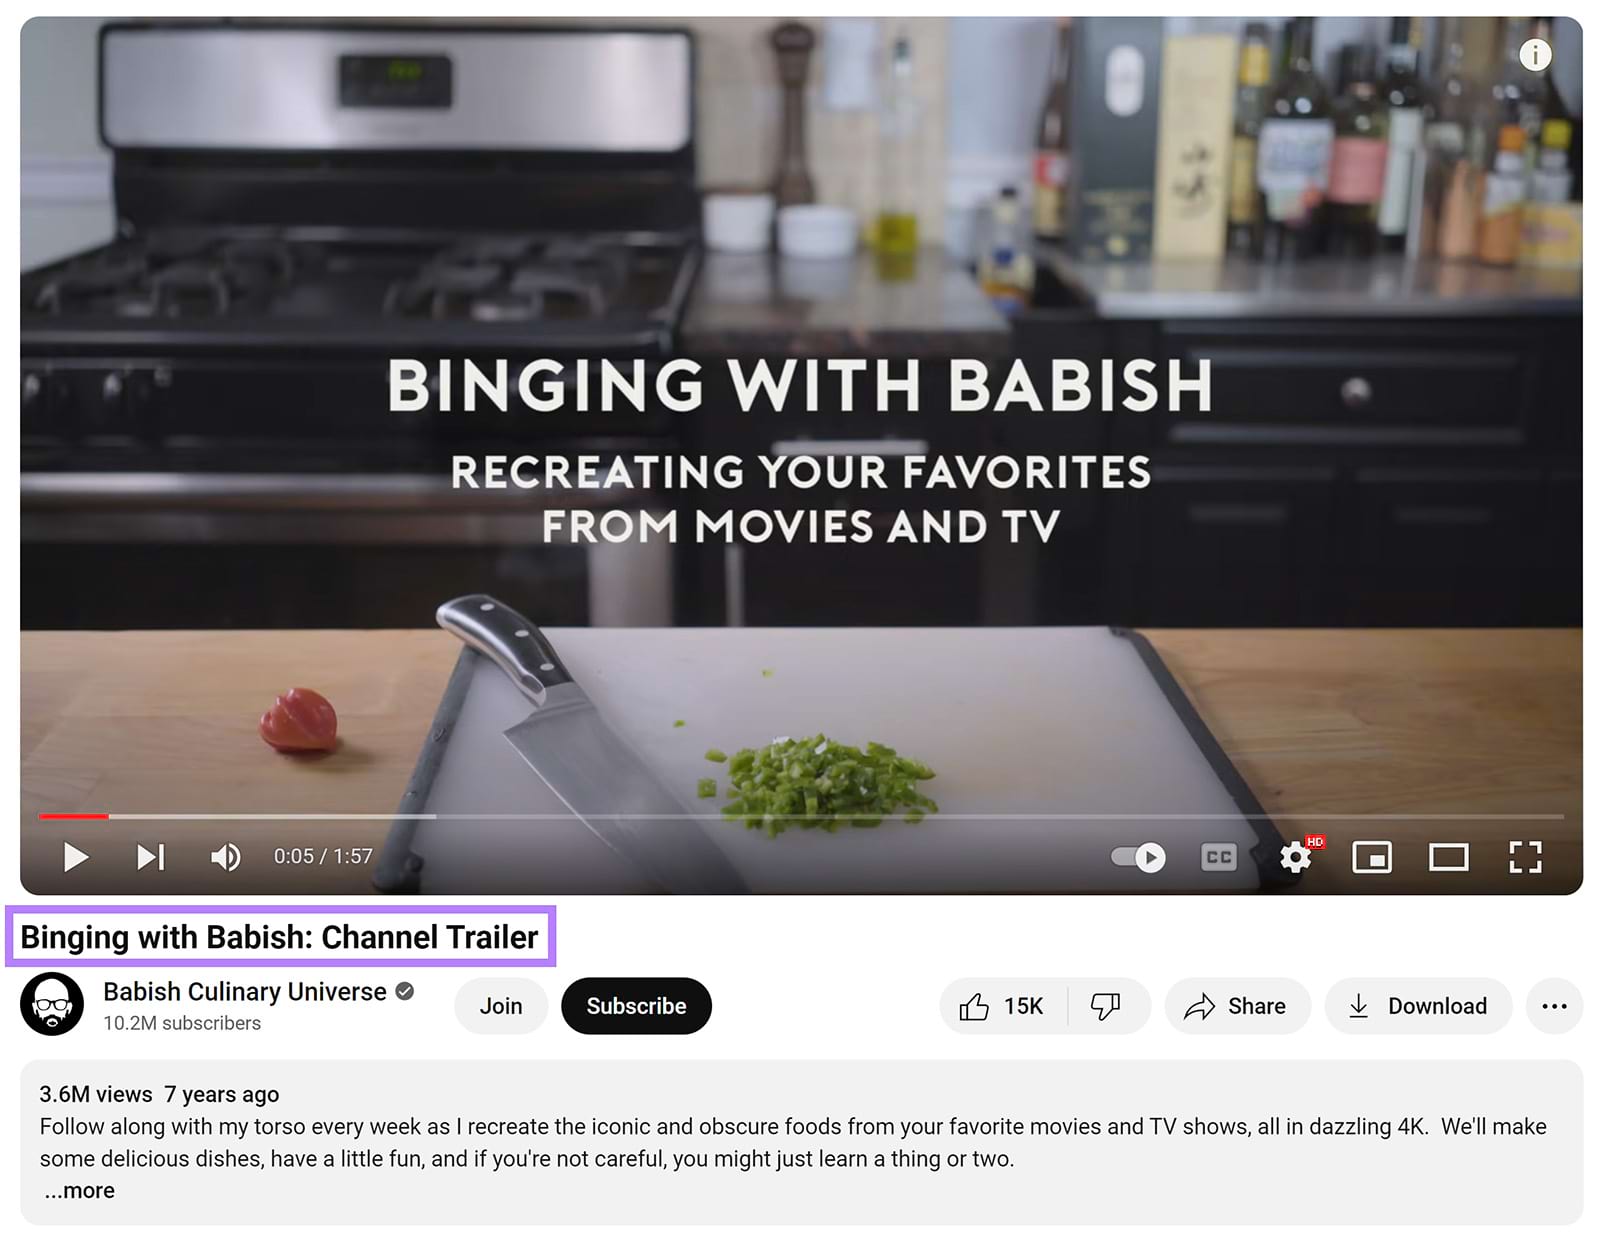 Binging with Babish channel trailer video with title highlighted.